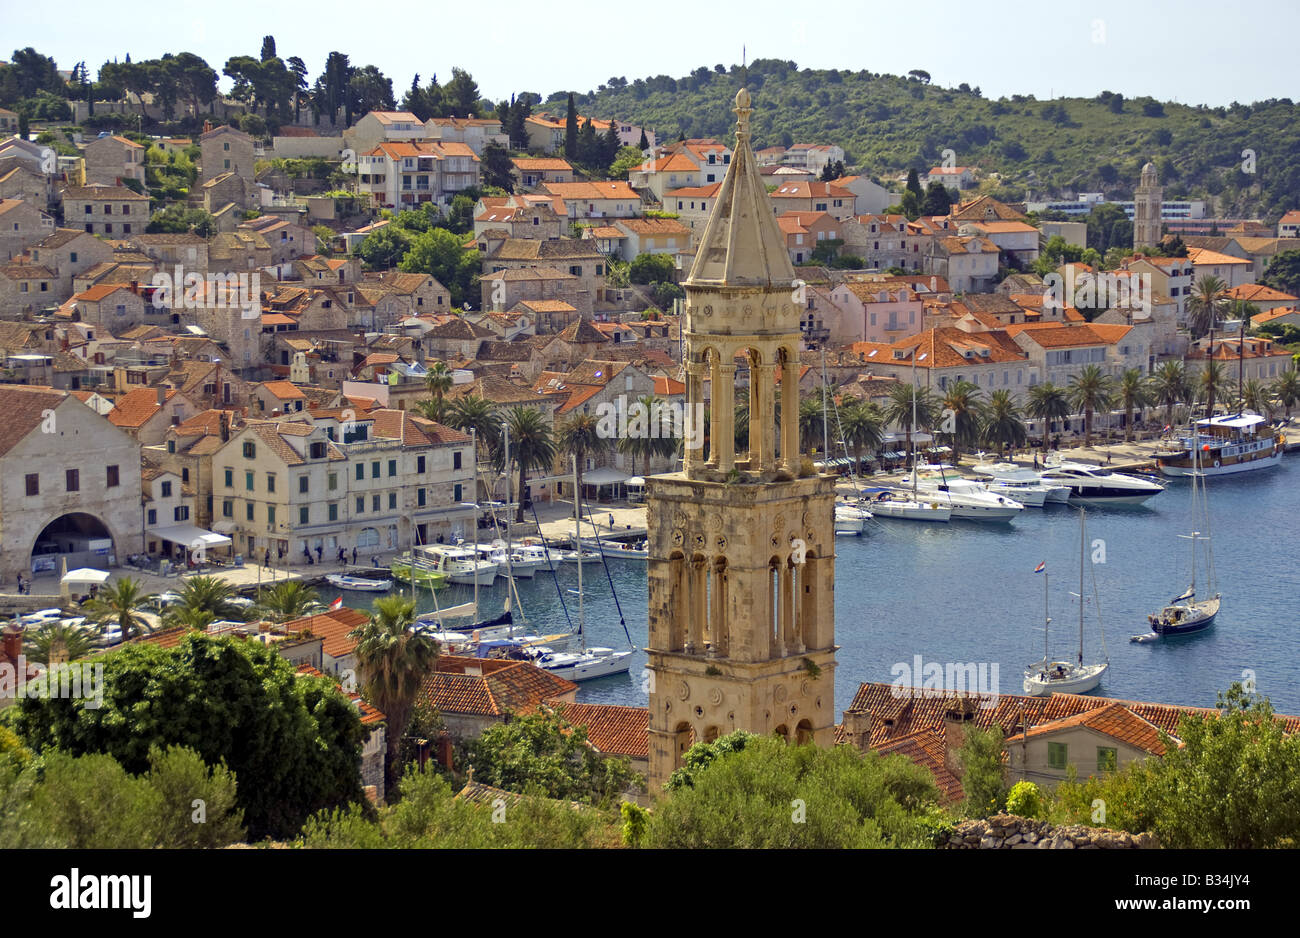 Hvar's medieval Venetian church bell tower, overlooking town's harbour waterfront, on island of Hvar in Adriatic Stock Photo